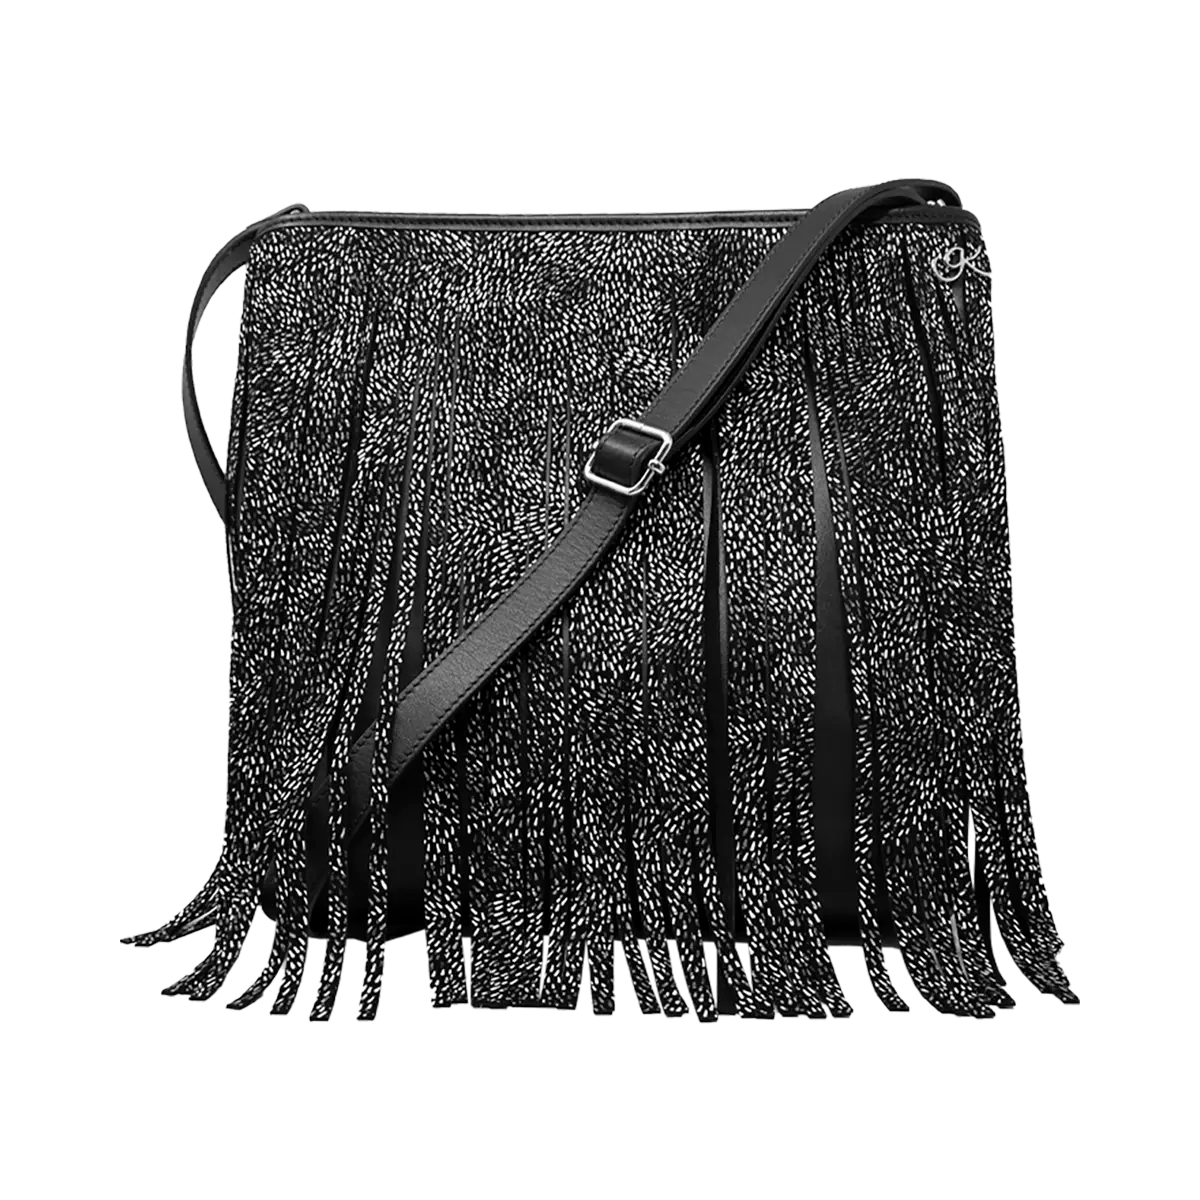 large black silver stripe leather crossbody bag with fringe. Fashion accessory for women in San Diego, CA.